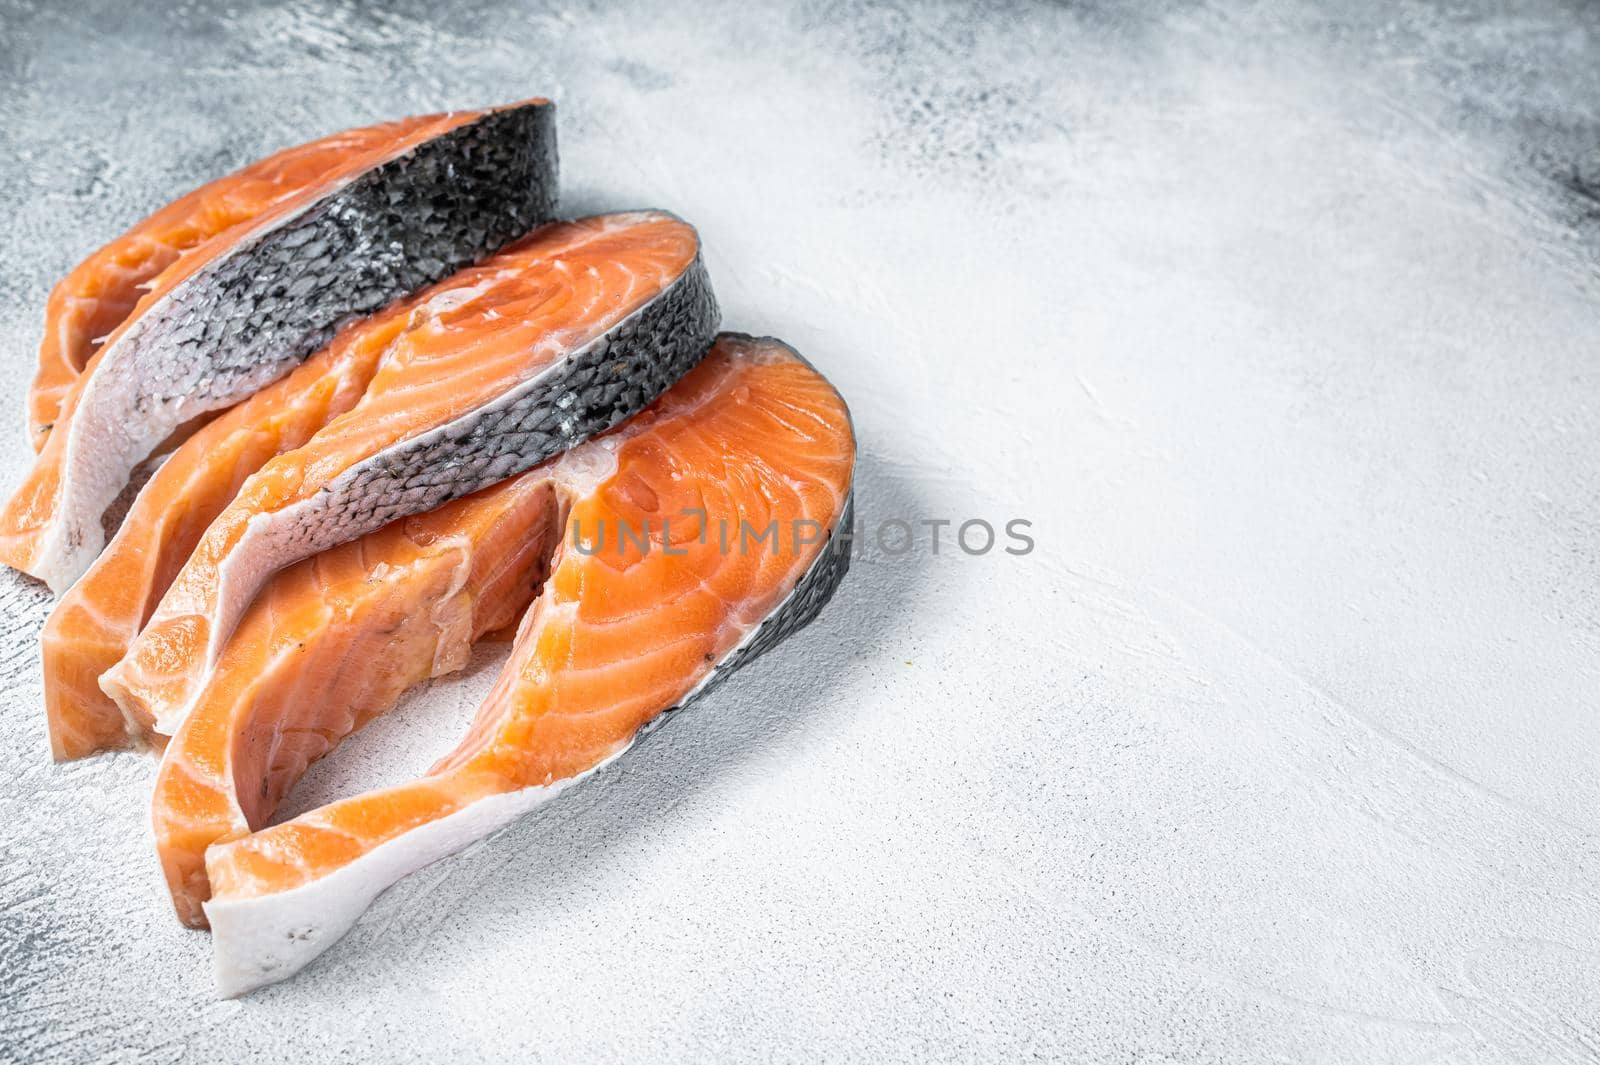 Salmon or trout steaks, raw fish prepared for cooking. White background. Top view. Copy space.